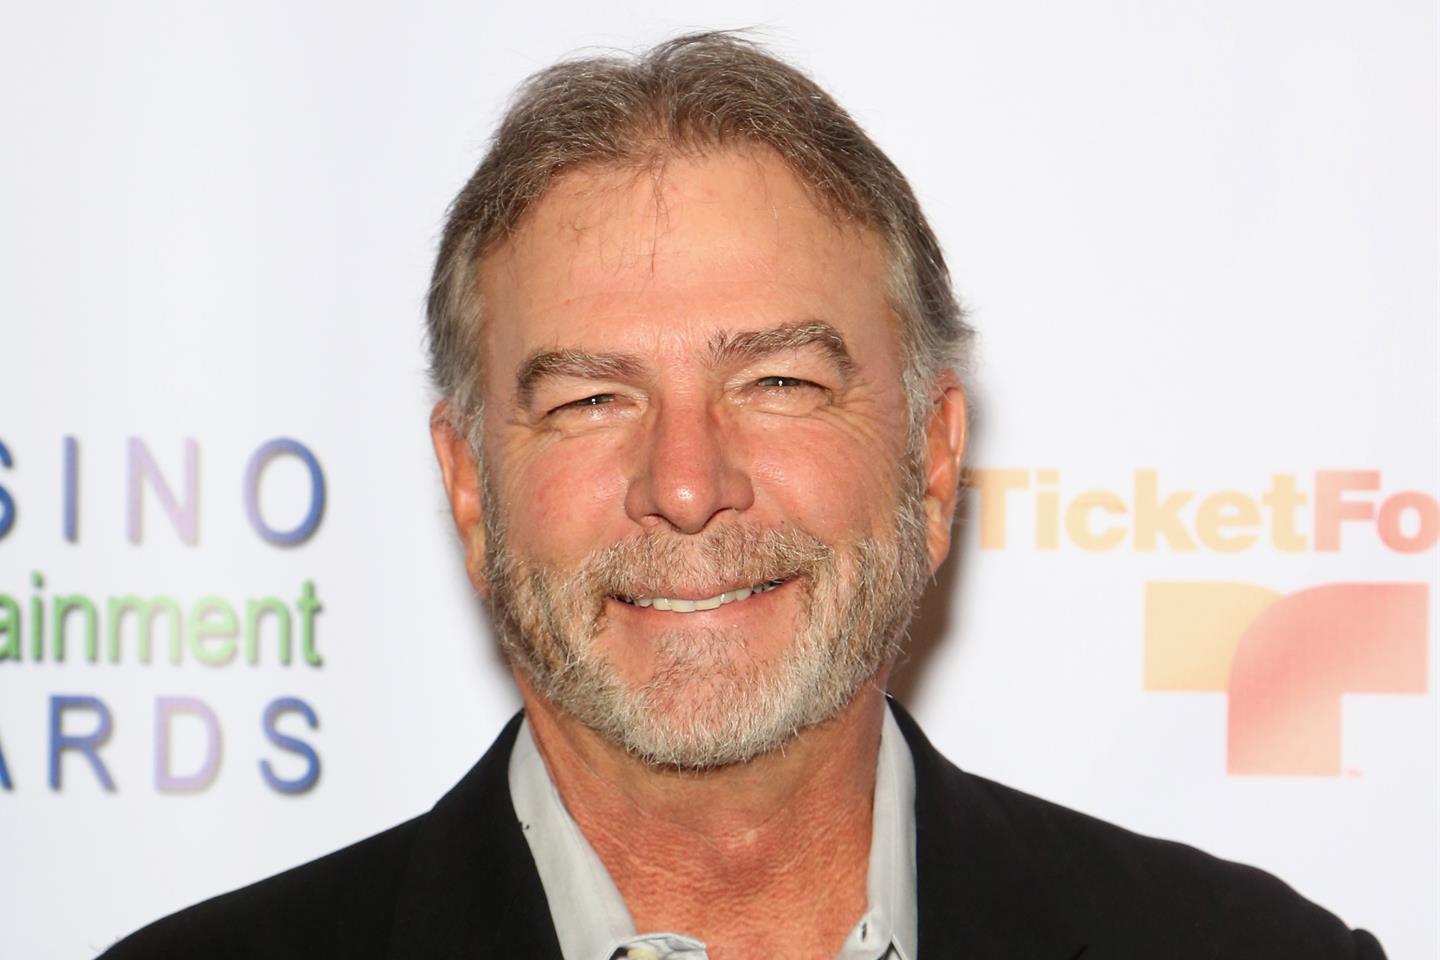 will bill engvall tour in 2023